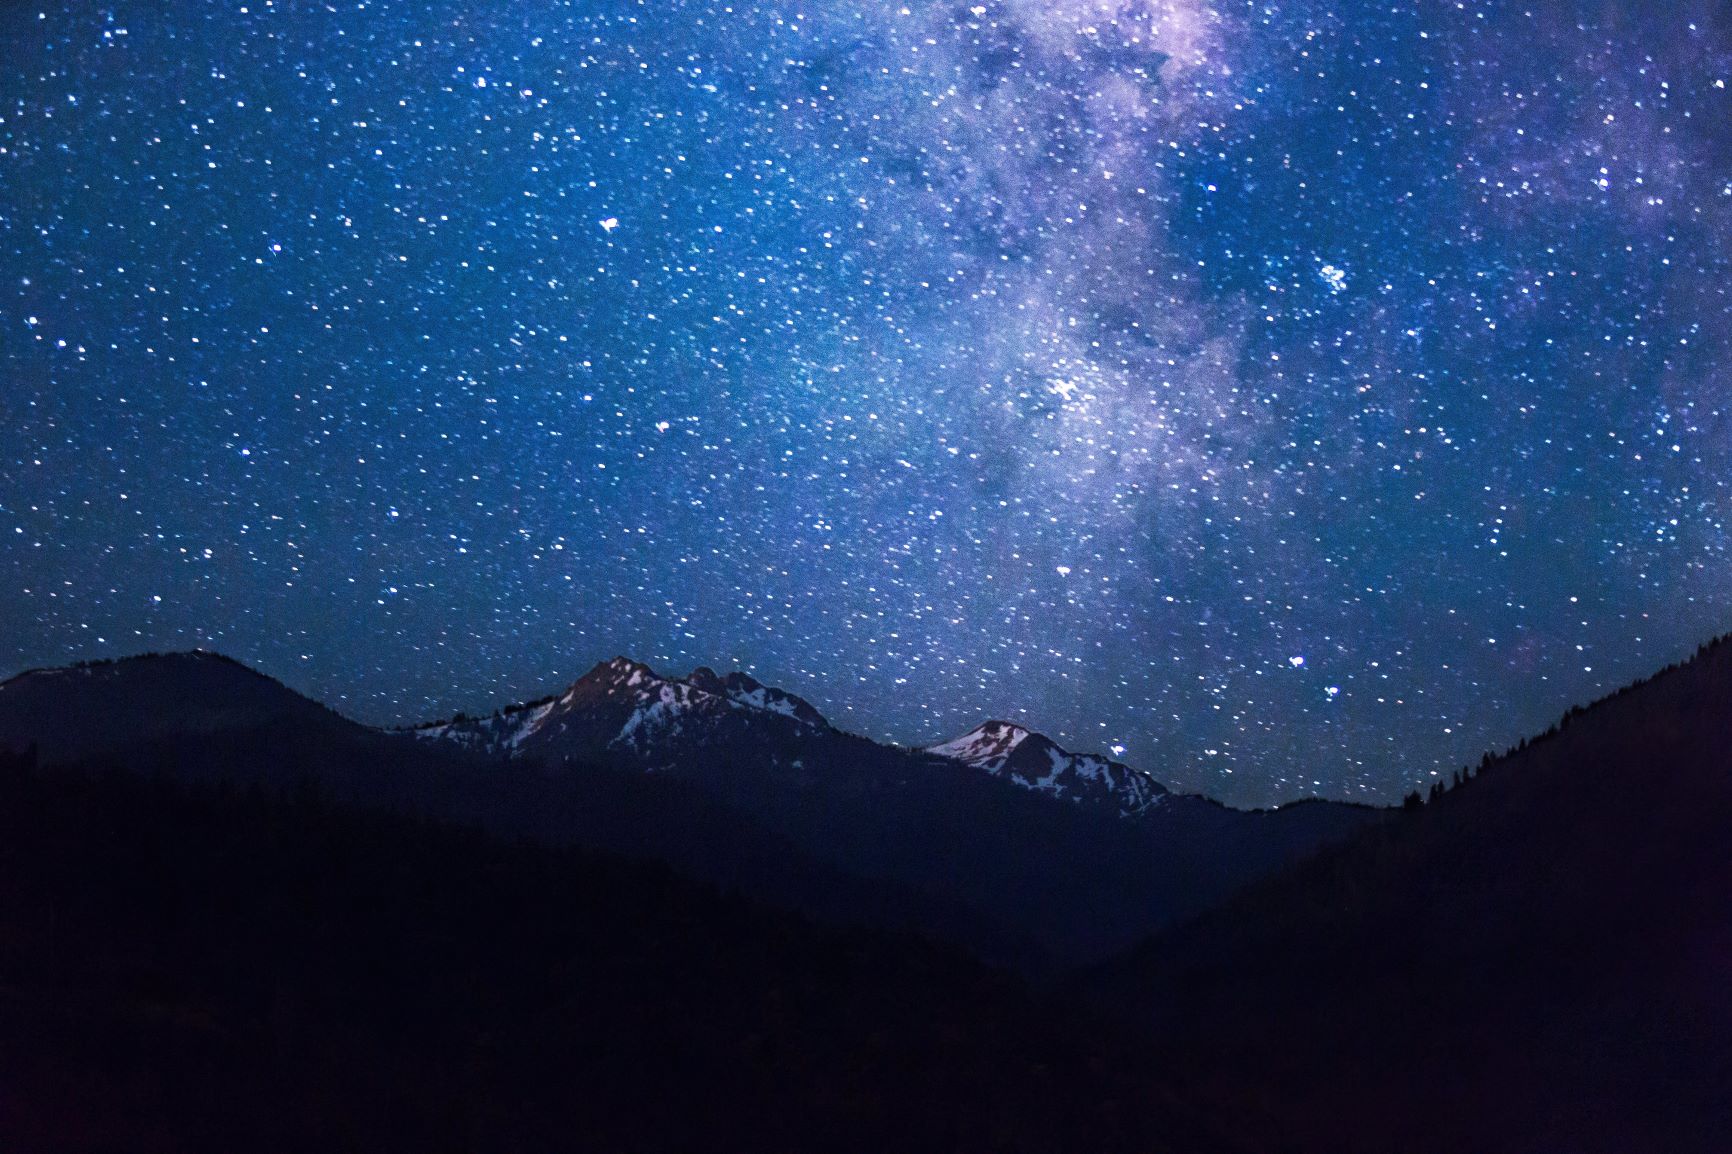 A bright, starry night sky above snow-capped forested mountains